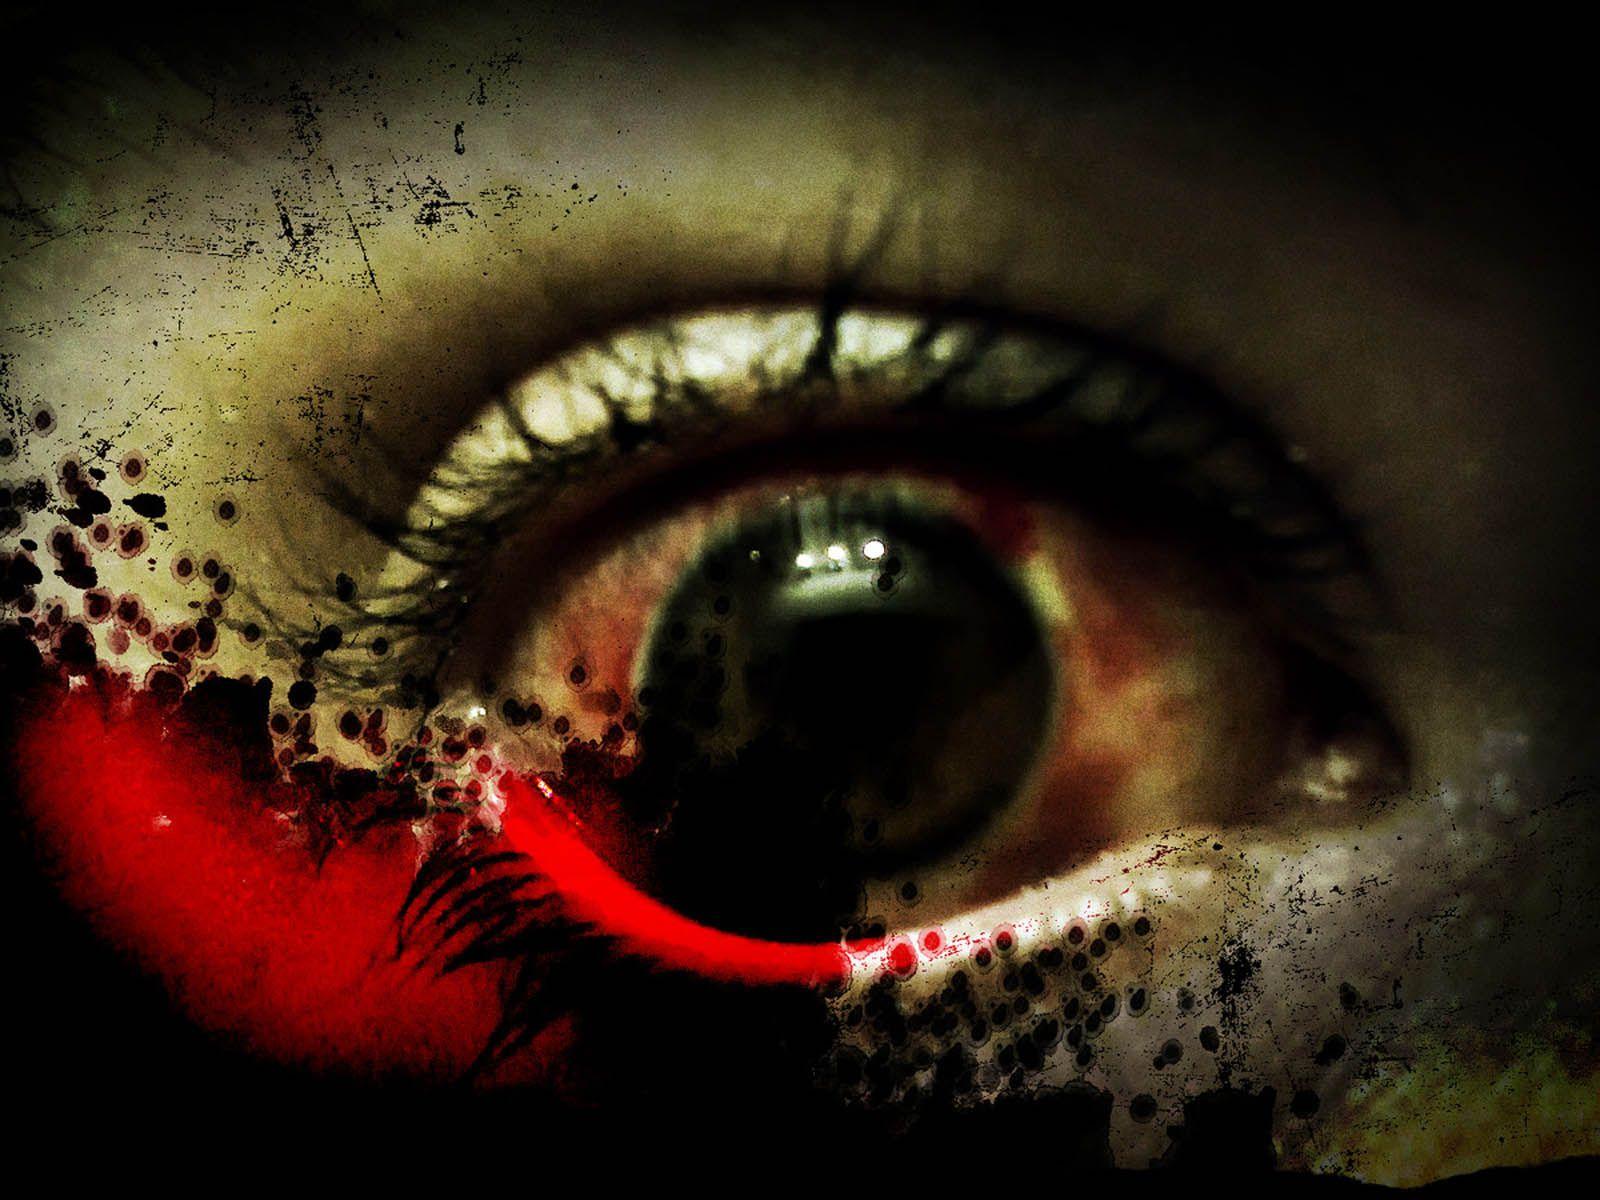 Eyes: The Horror Game HD Wallpapers and Backgrounds